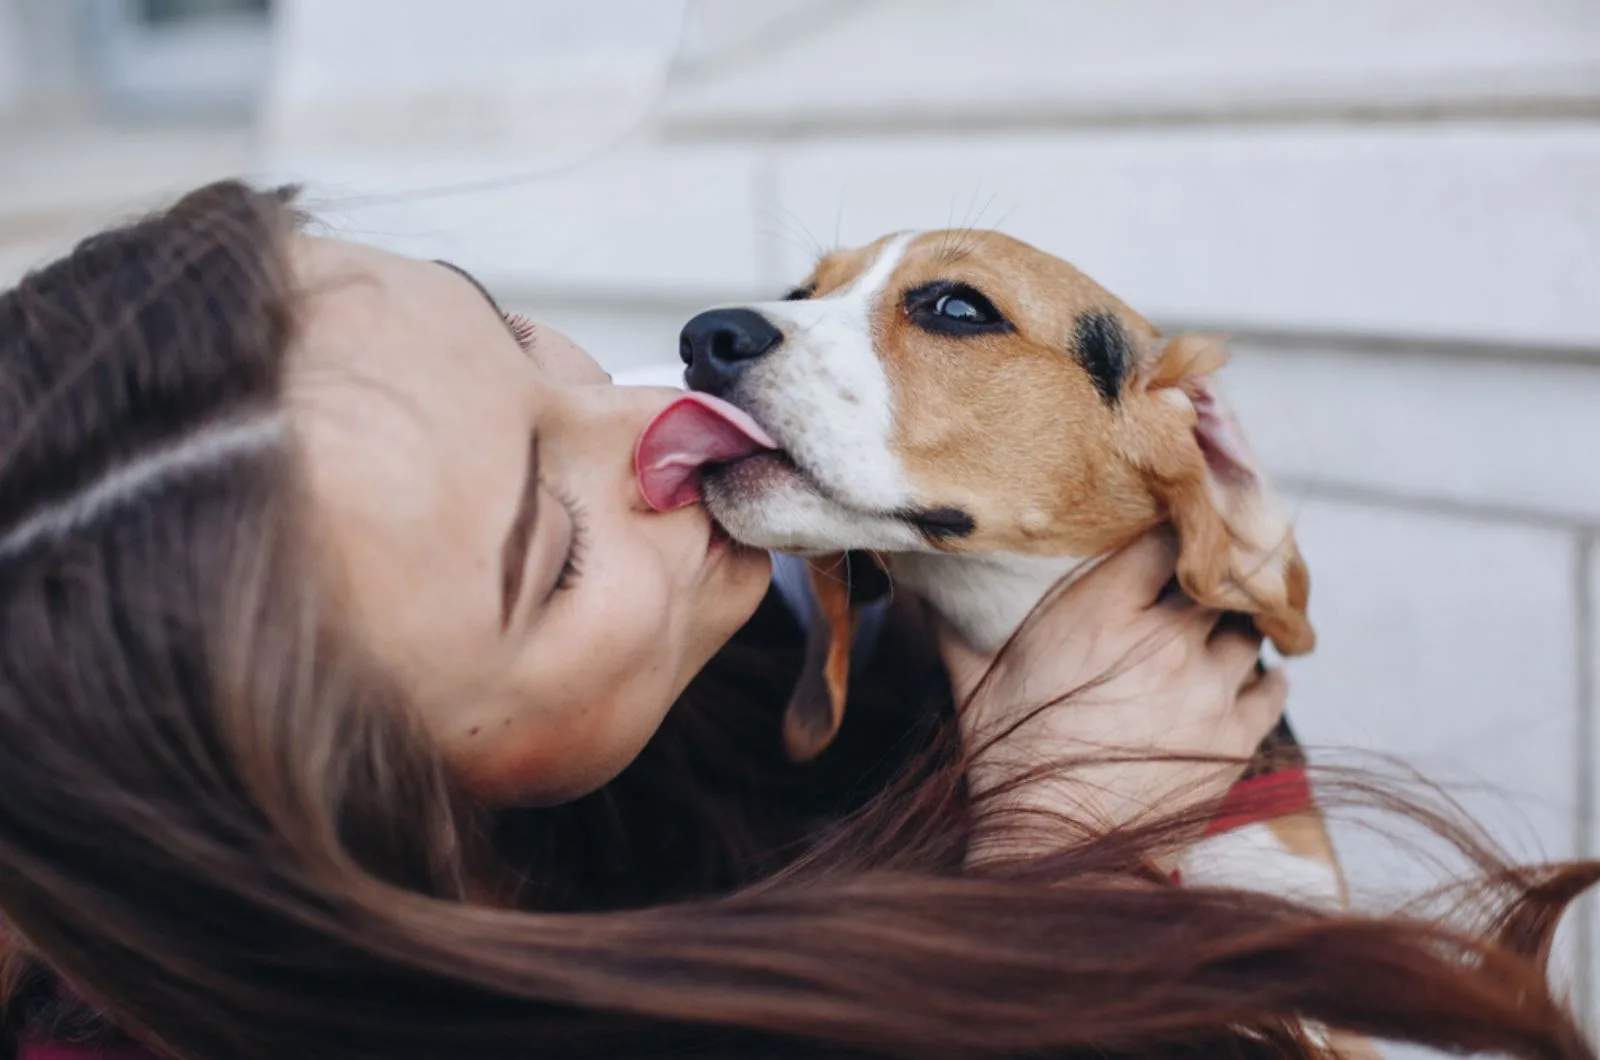 little beagle dog licking a woman at home